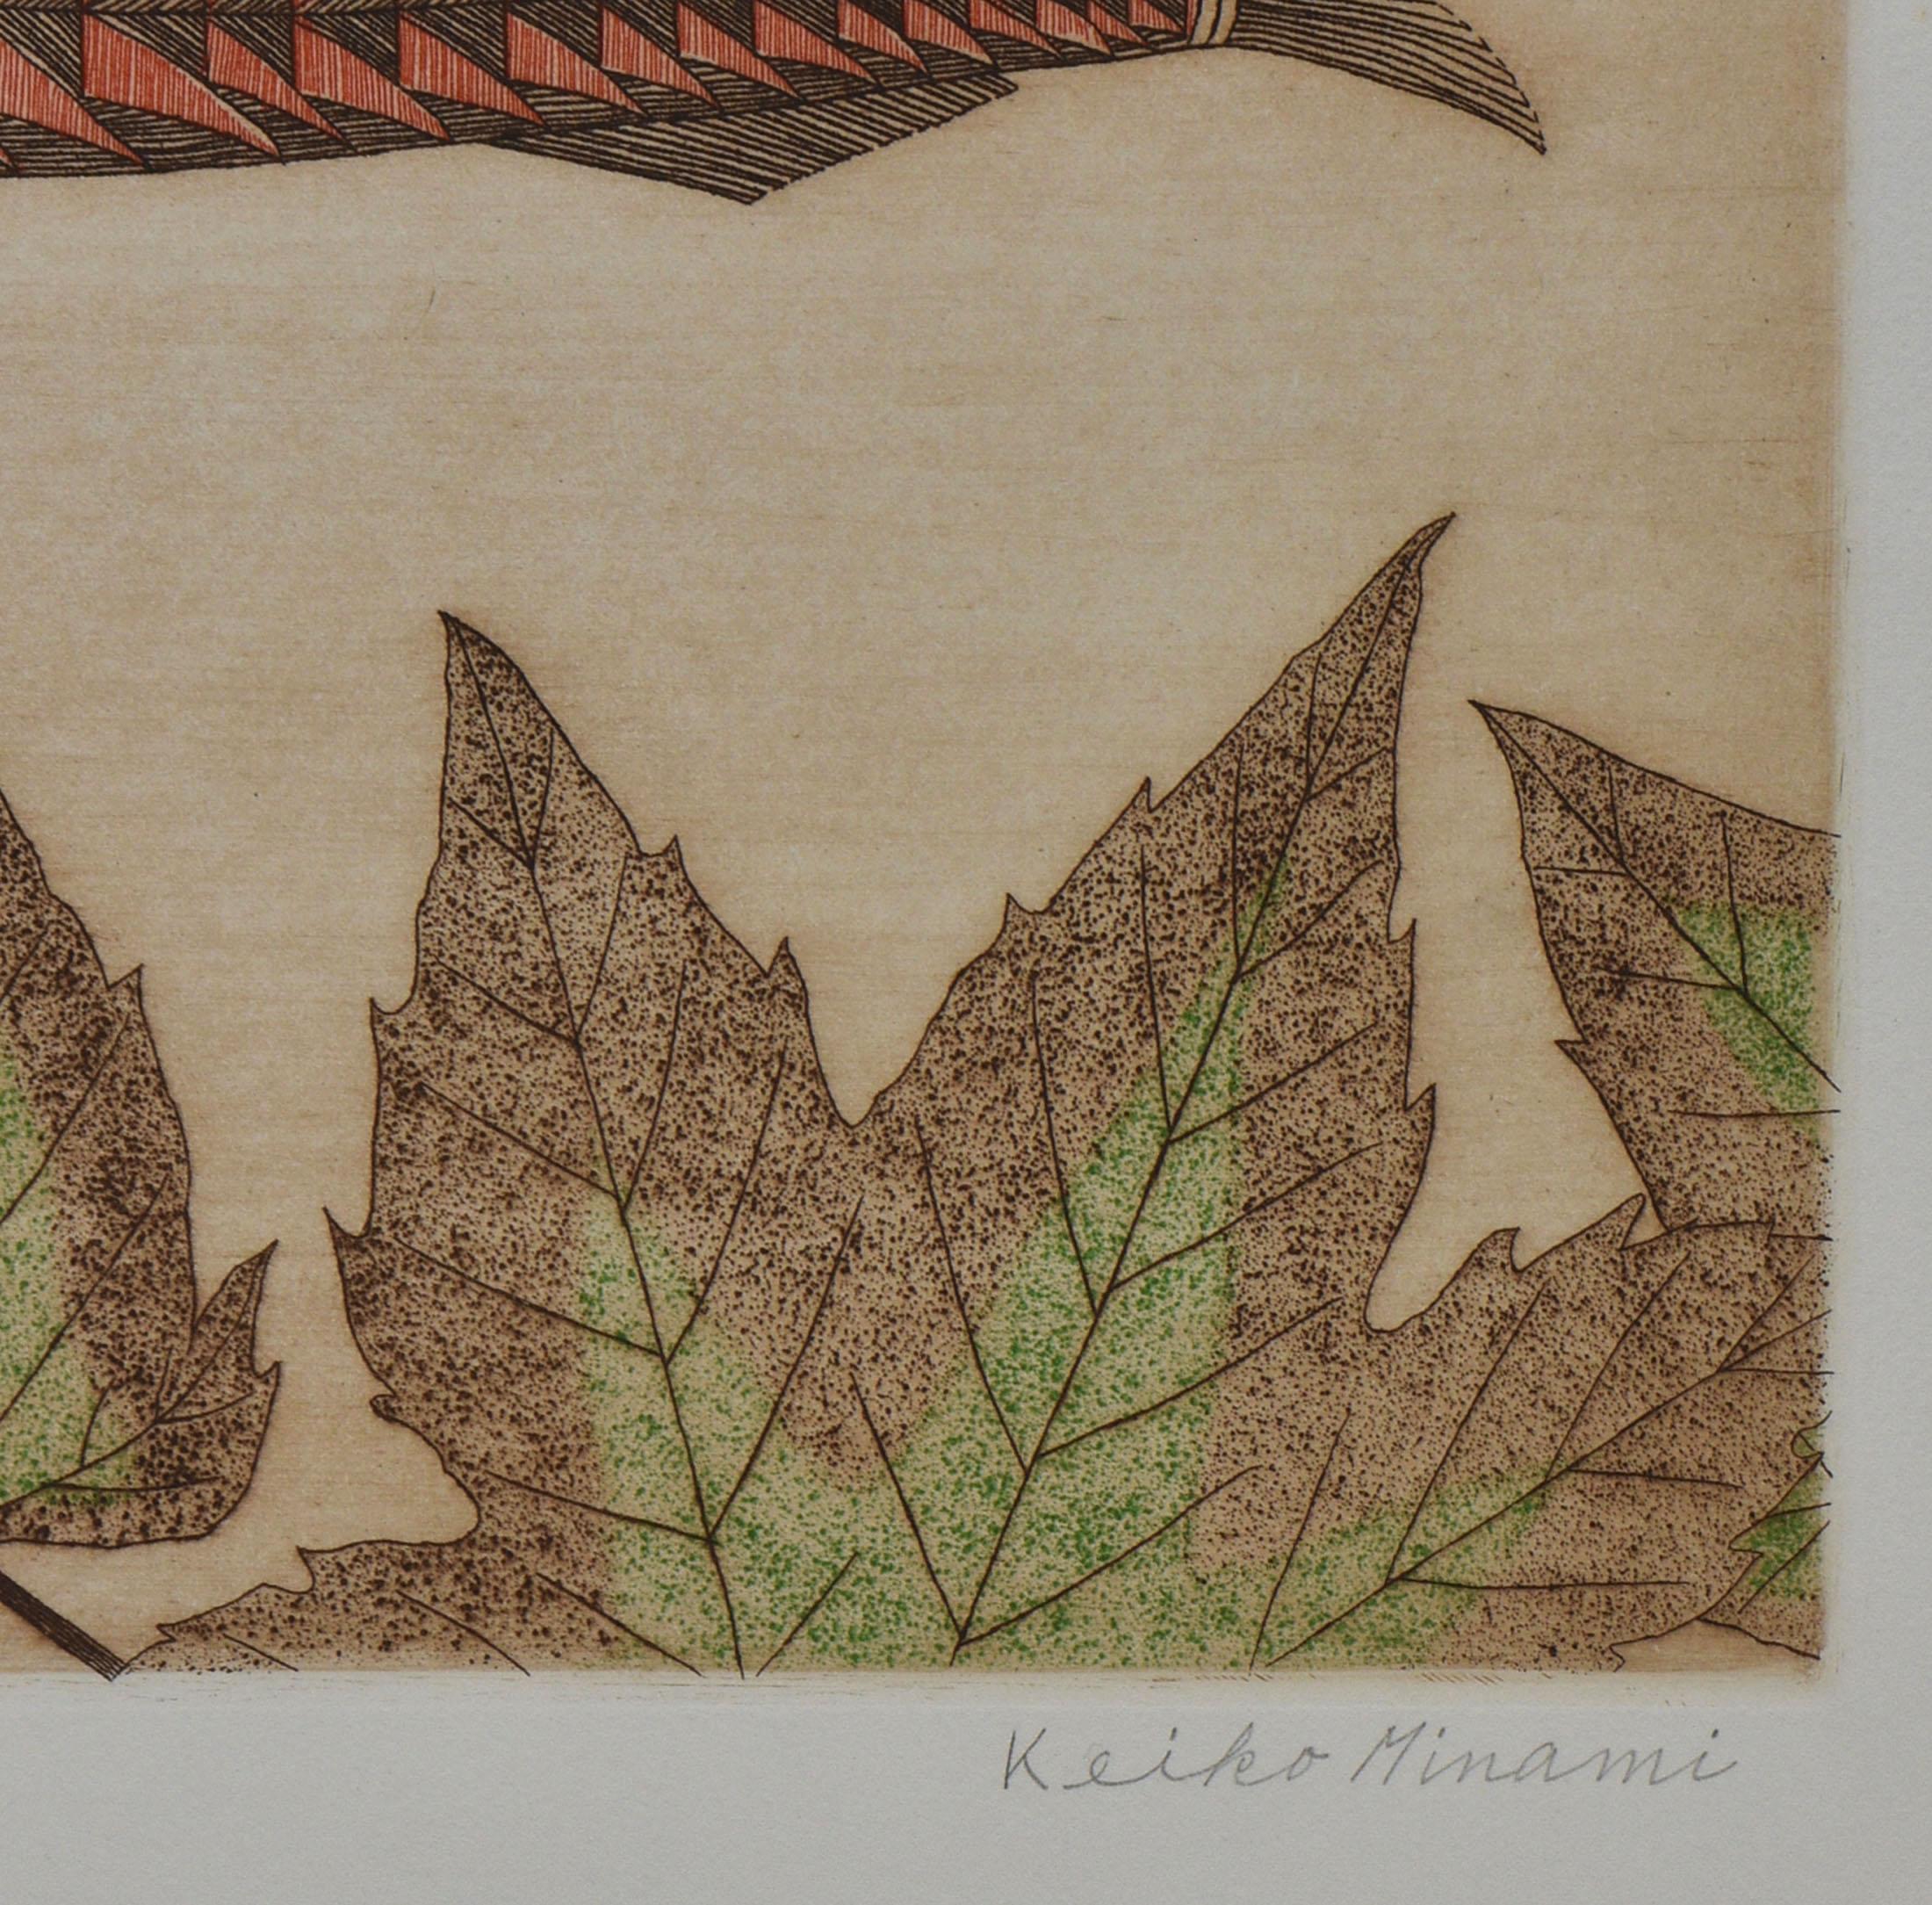 Folk Art Keiko Minami Signed Etching with Aquatint on Bfk Rives Wove 'Fishes' Japanese For Sale